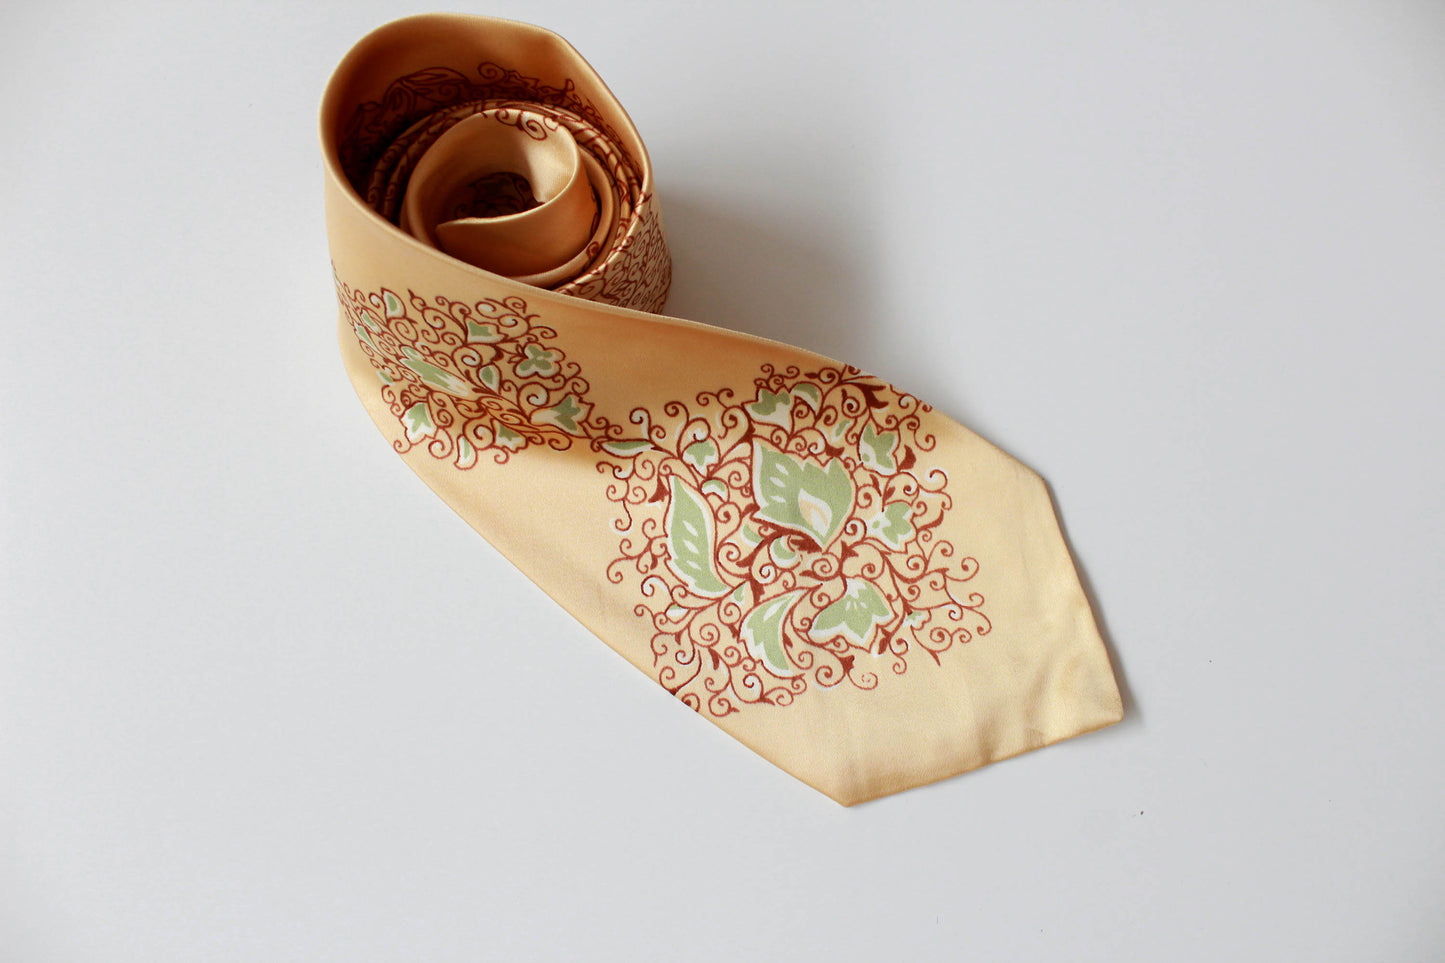 1940s yellow rayon necktie with wide tongue by Arrow. Brown and green ornate scrolling floral print design. vintage bold look necktie